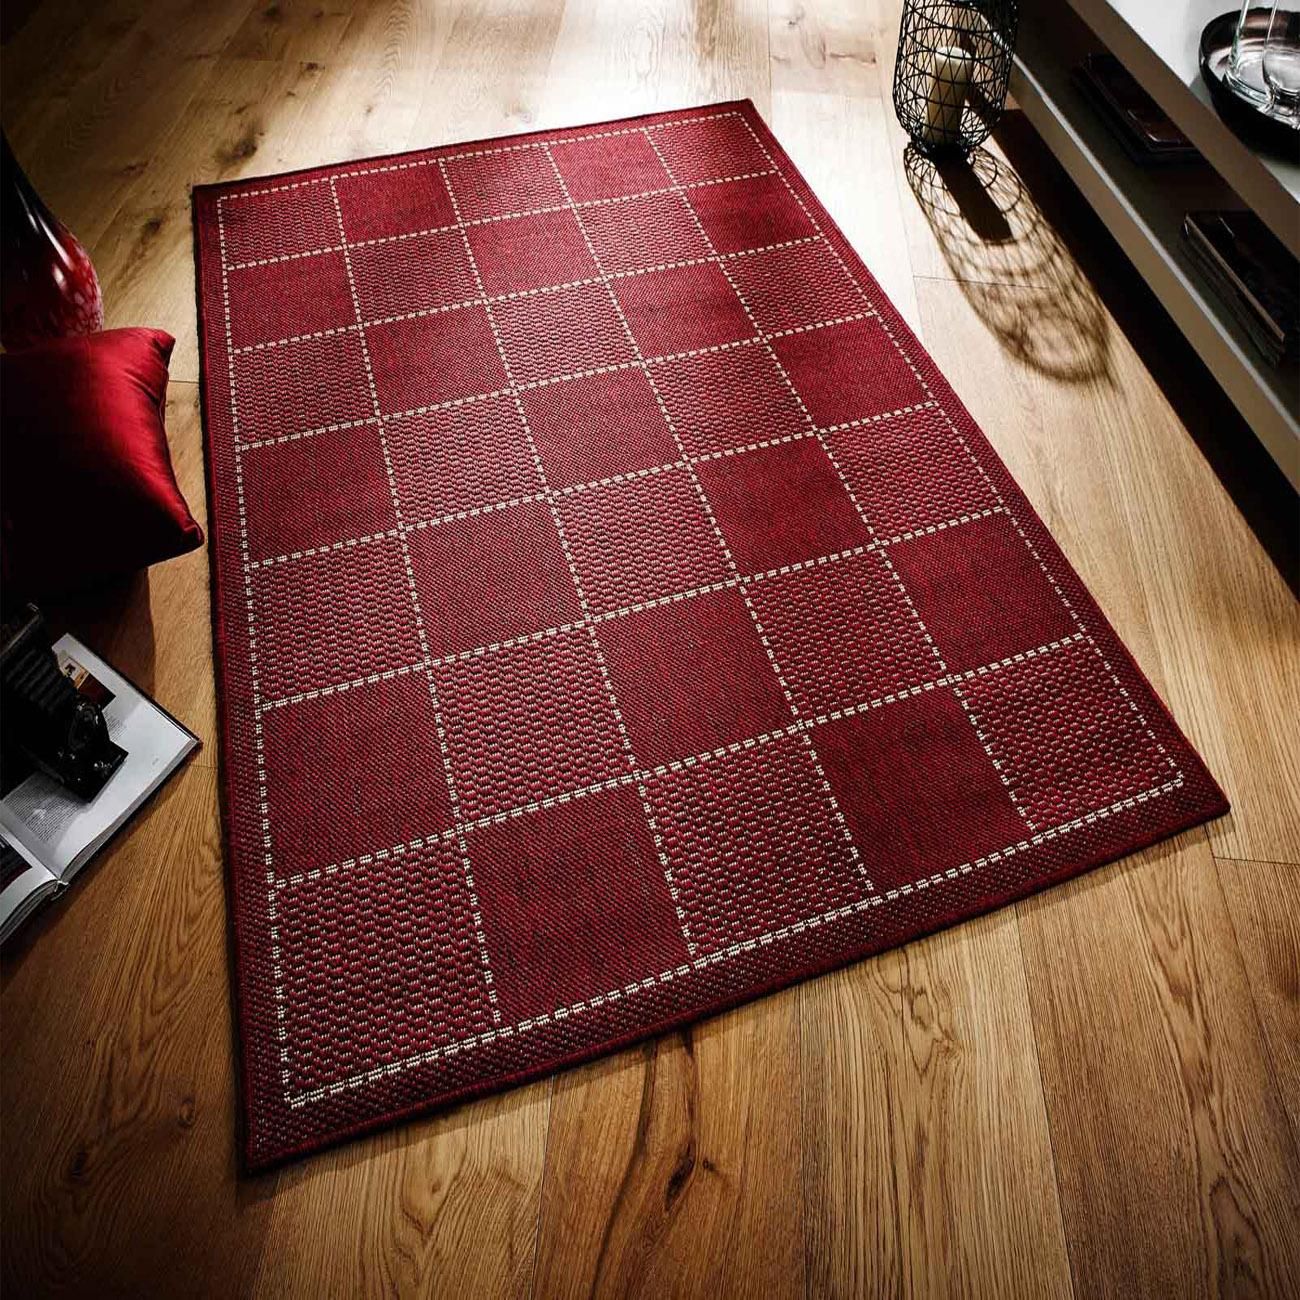 Checked Red Kitchen Rug With Antislip Gel Backing Therugshopuk